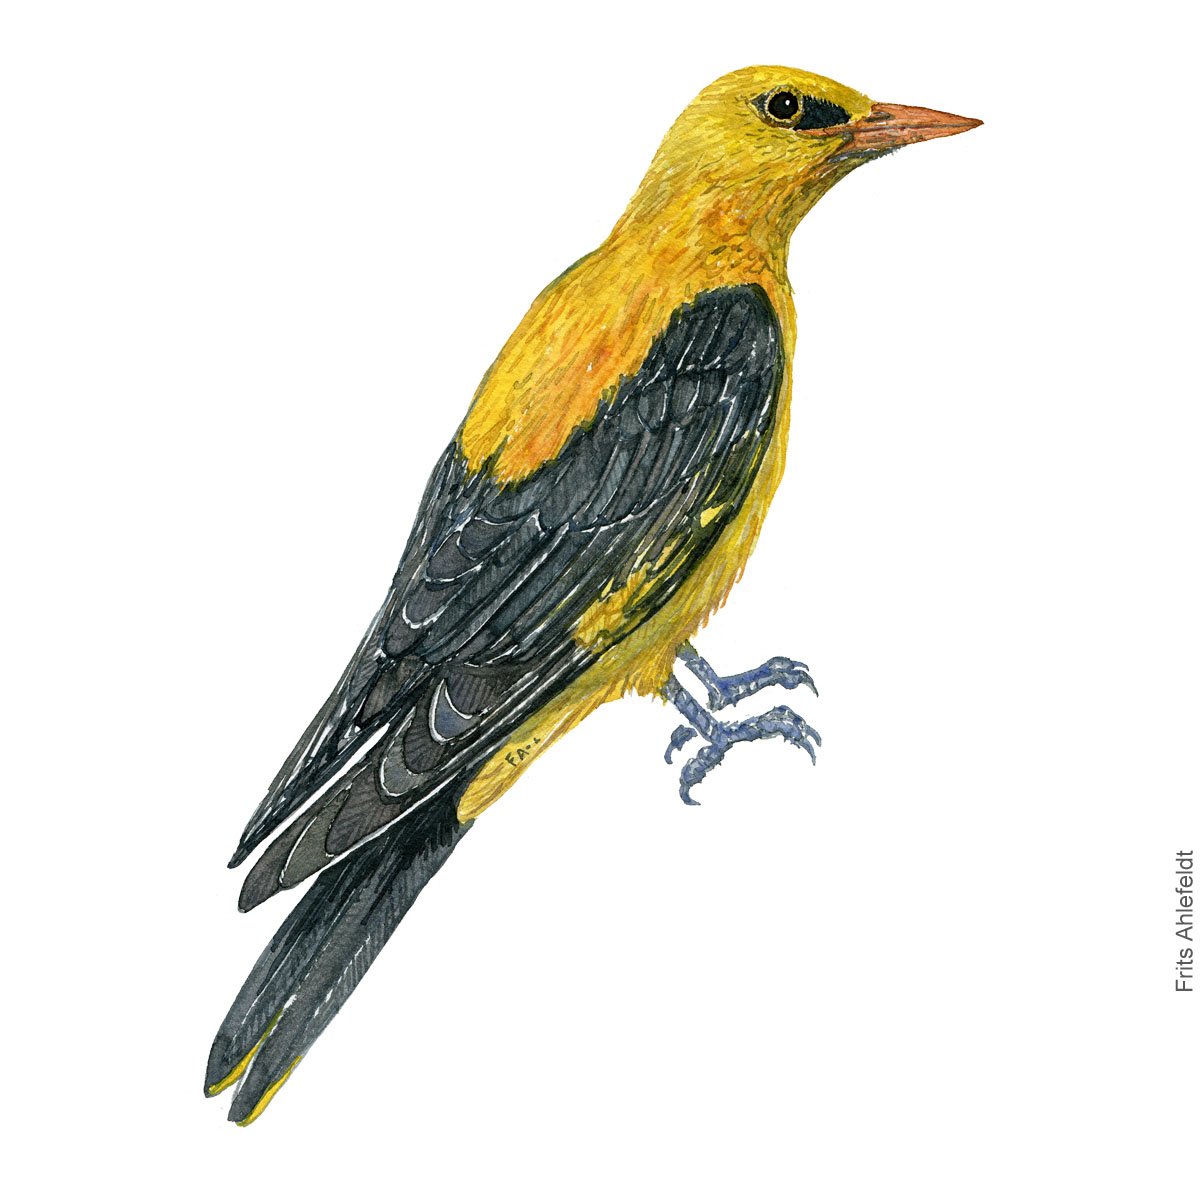 Pirol - Golden oriole - Bird painting in watercolor by Frits Ahlefeldt - Fugle akvarel